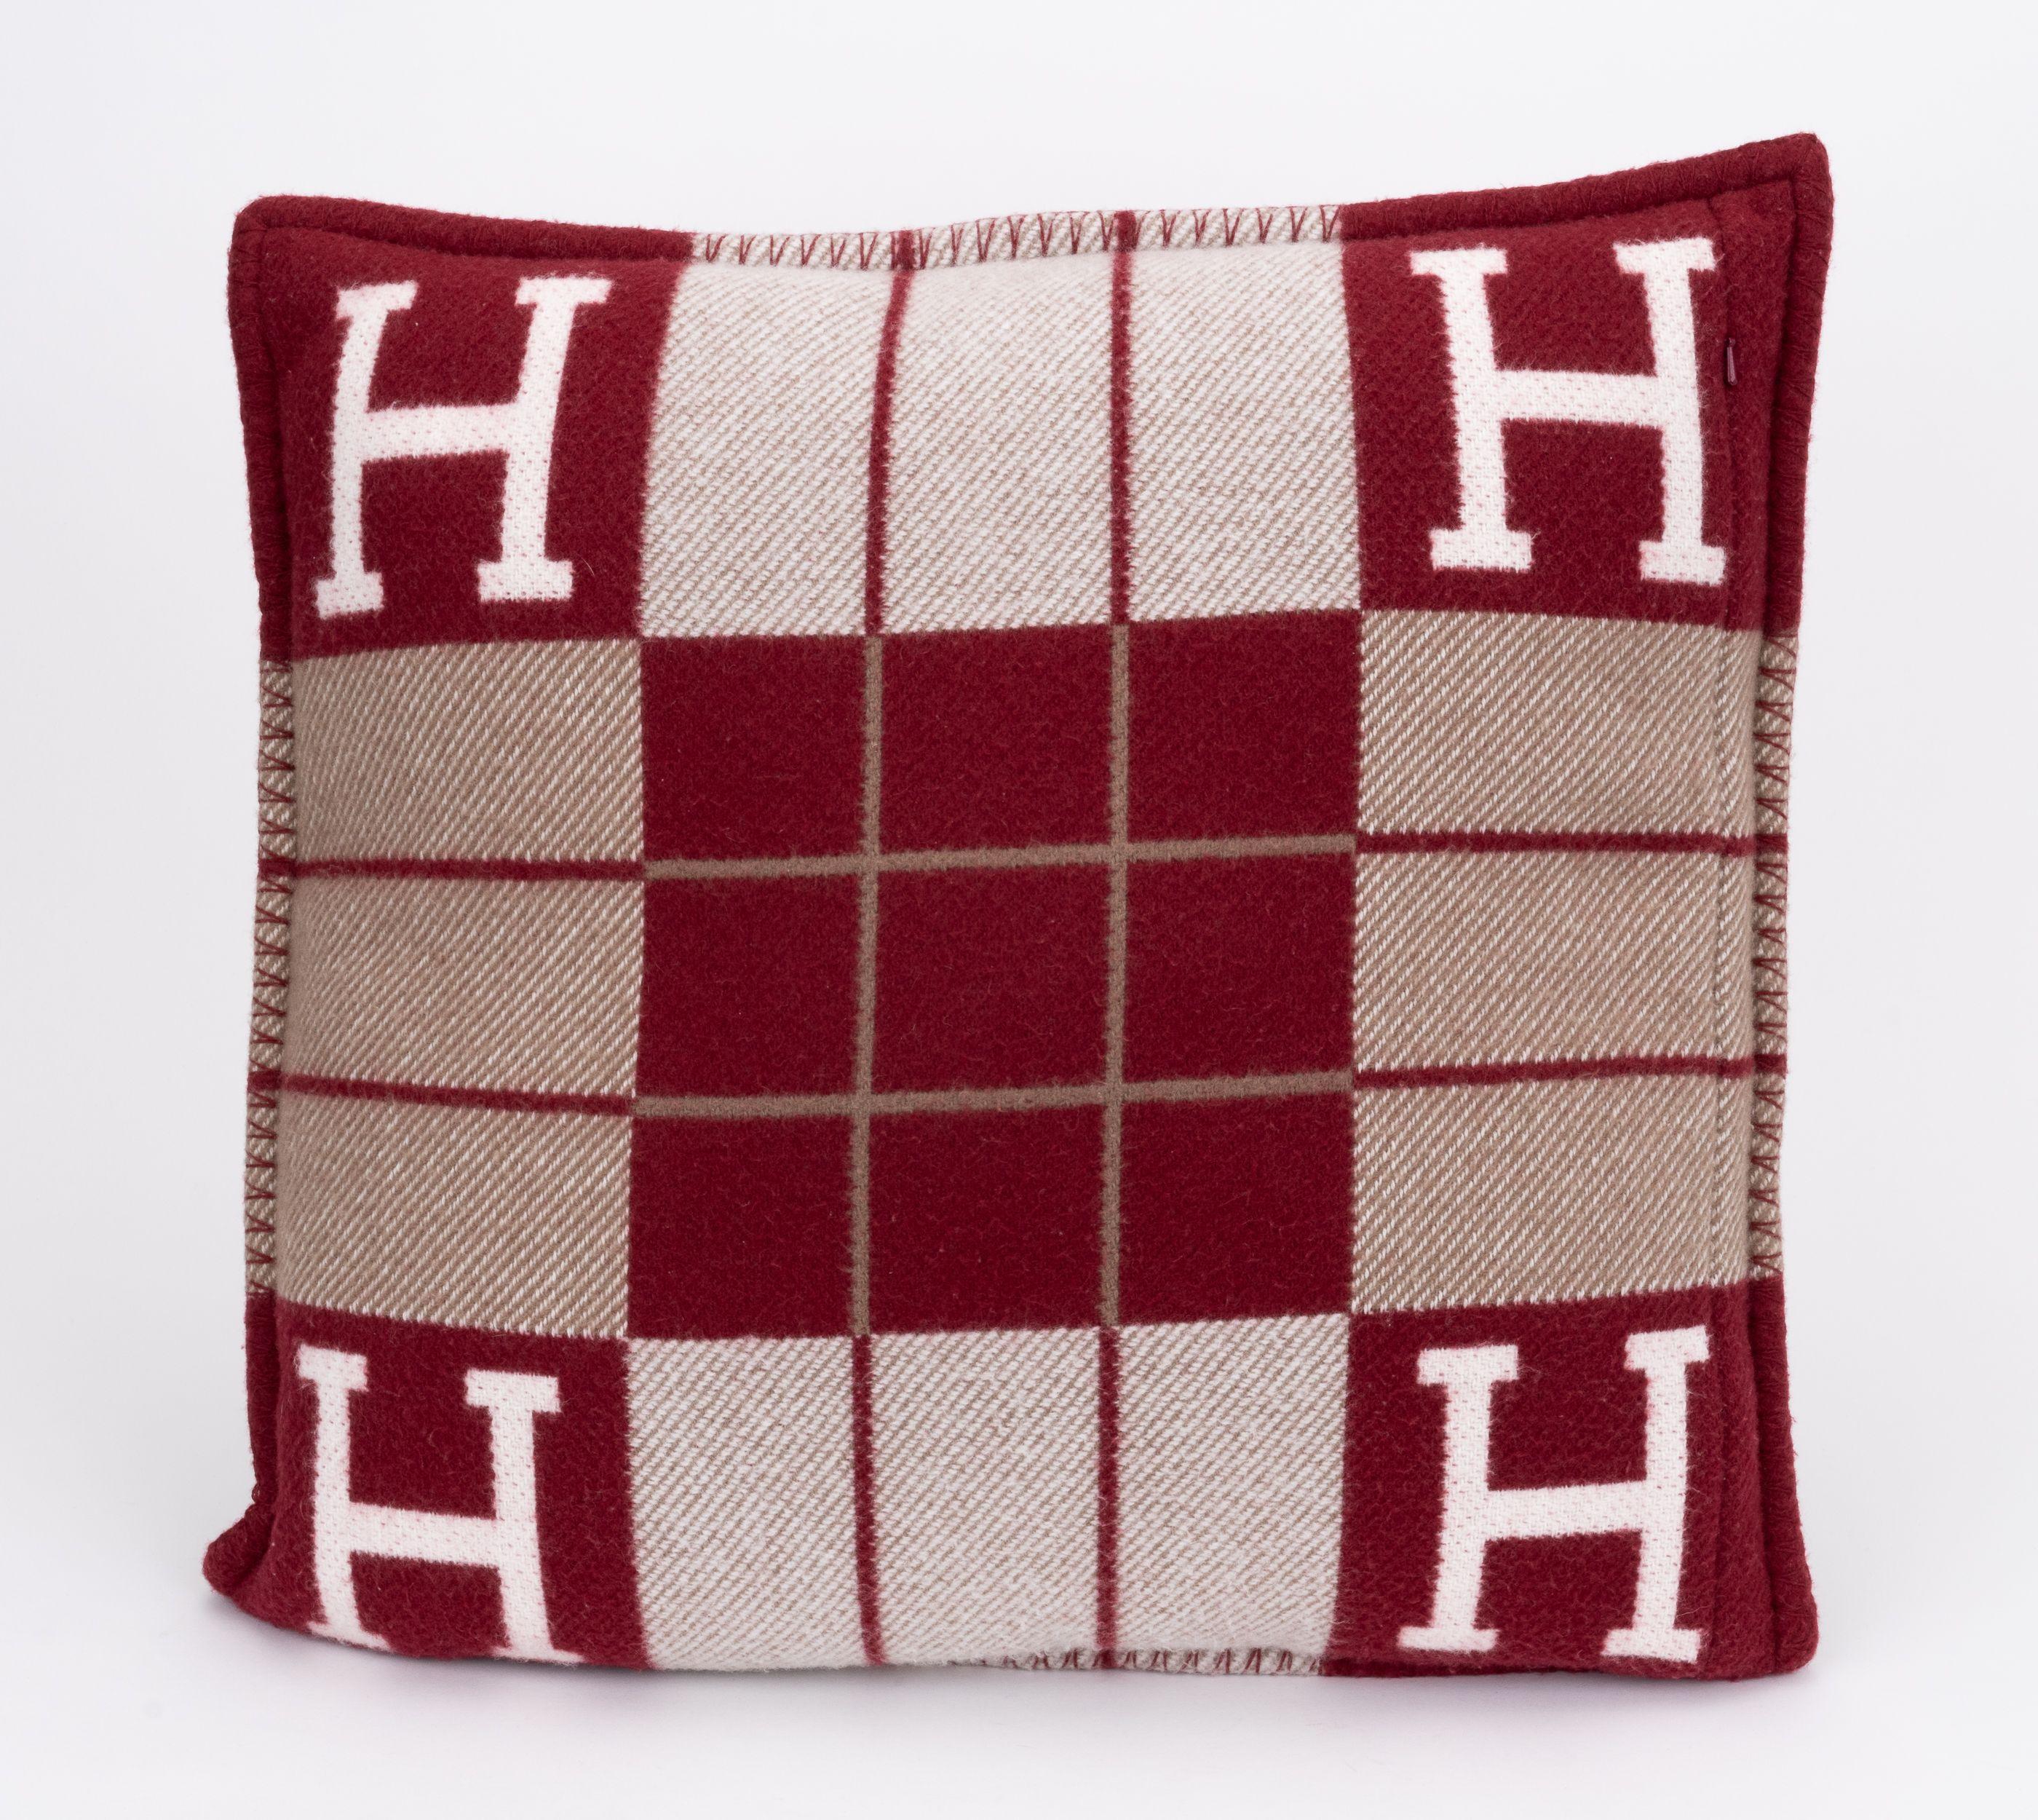 Up for sale brand new Hermès large Avalon pillow in discontinued burgundy color way. Taupe an cream decoration. 90% wool, 10% cashmere. Dry clean only.